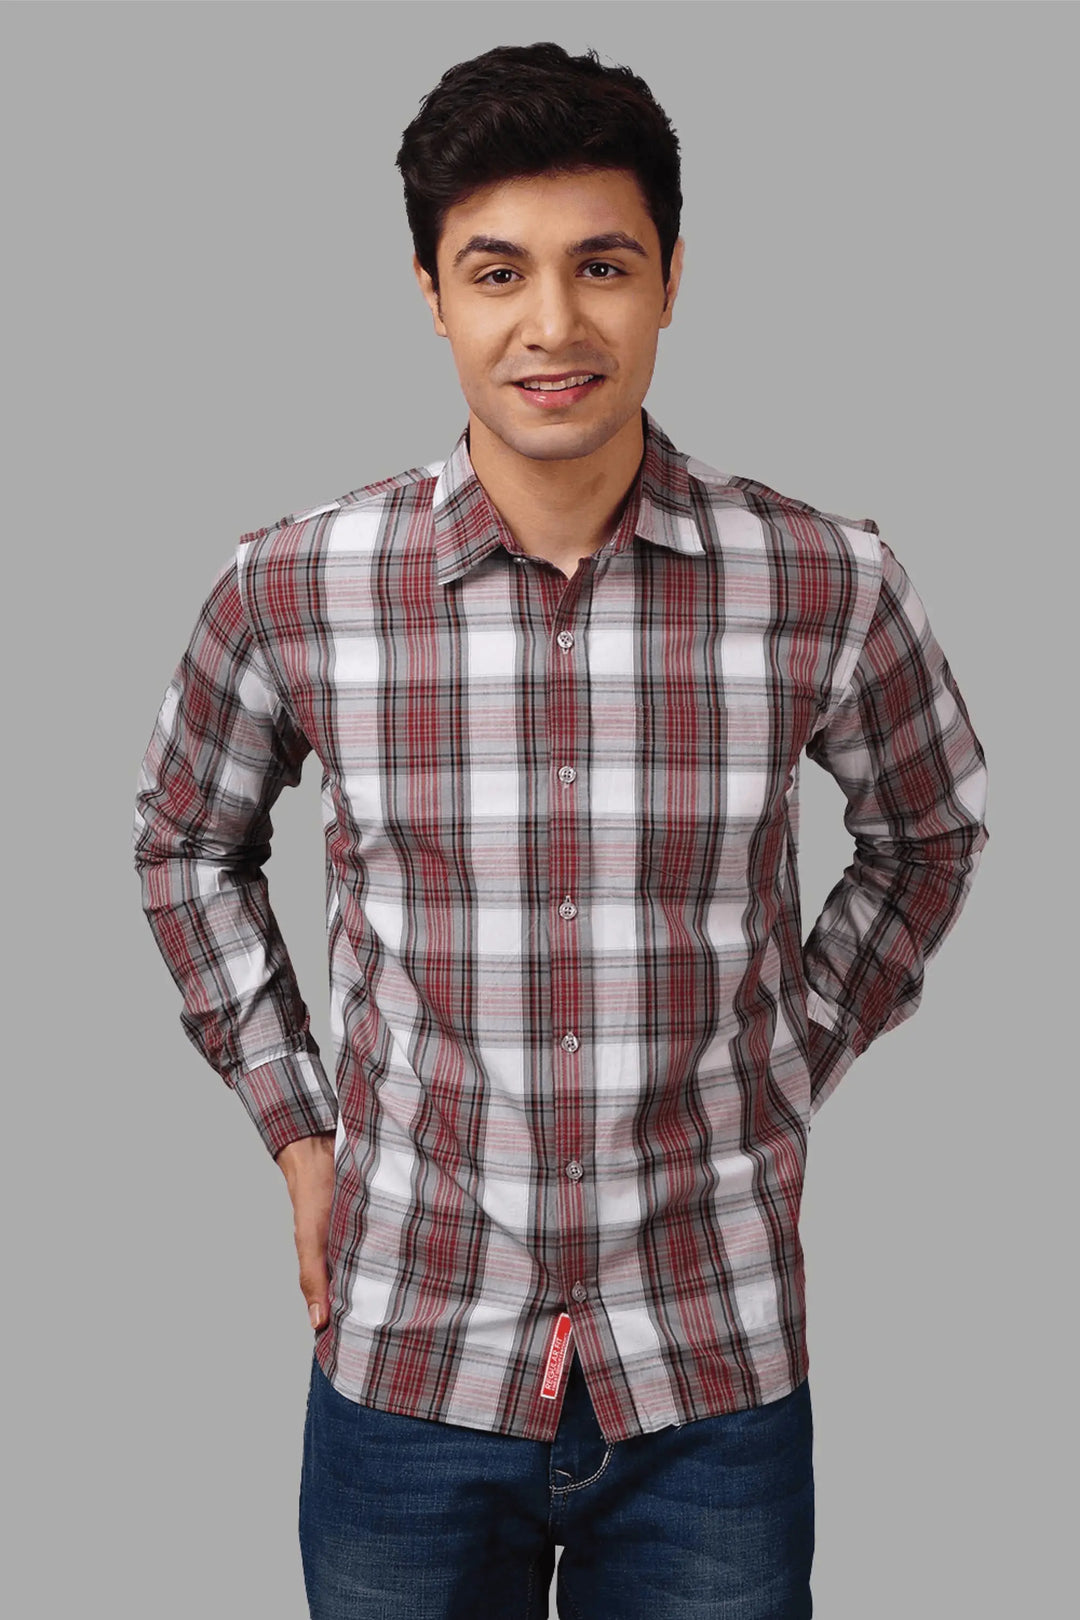 Best party wear shirt in mens fashion . And it's conmfortable and perfect look in reasonable price.